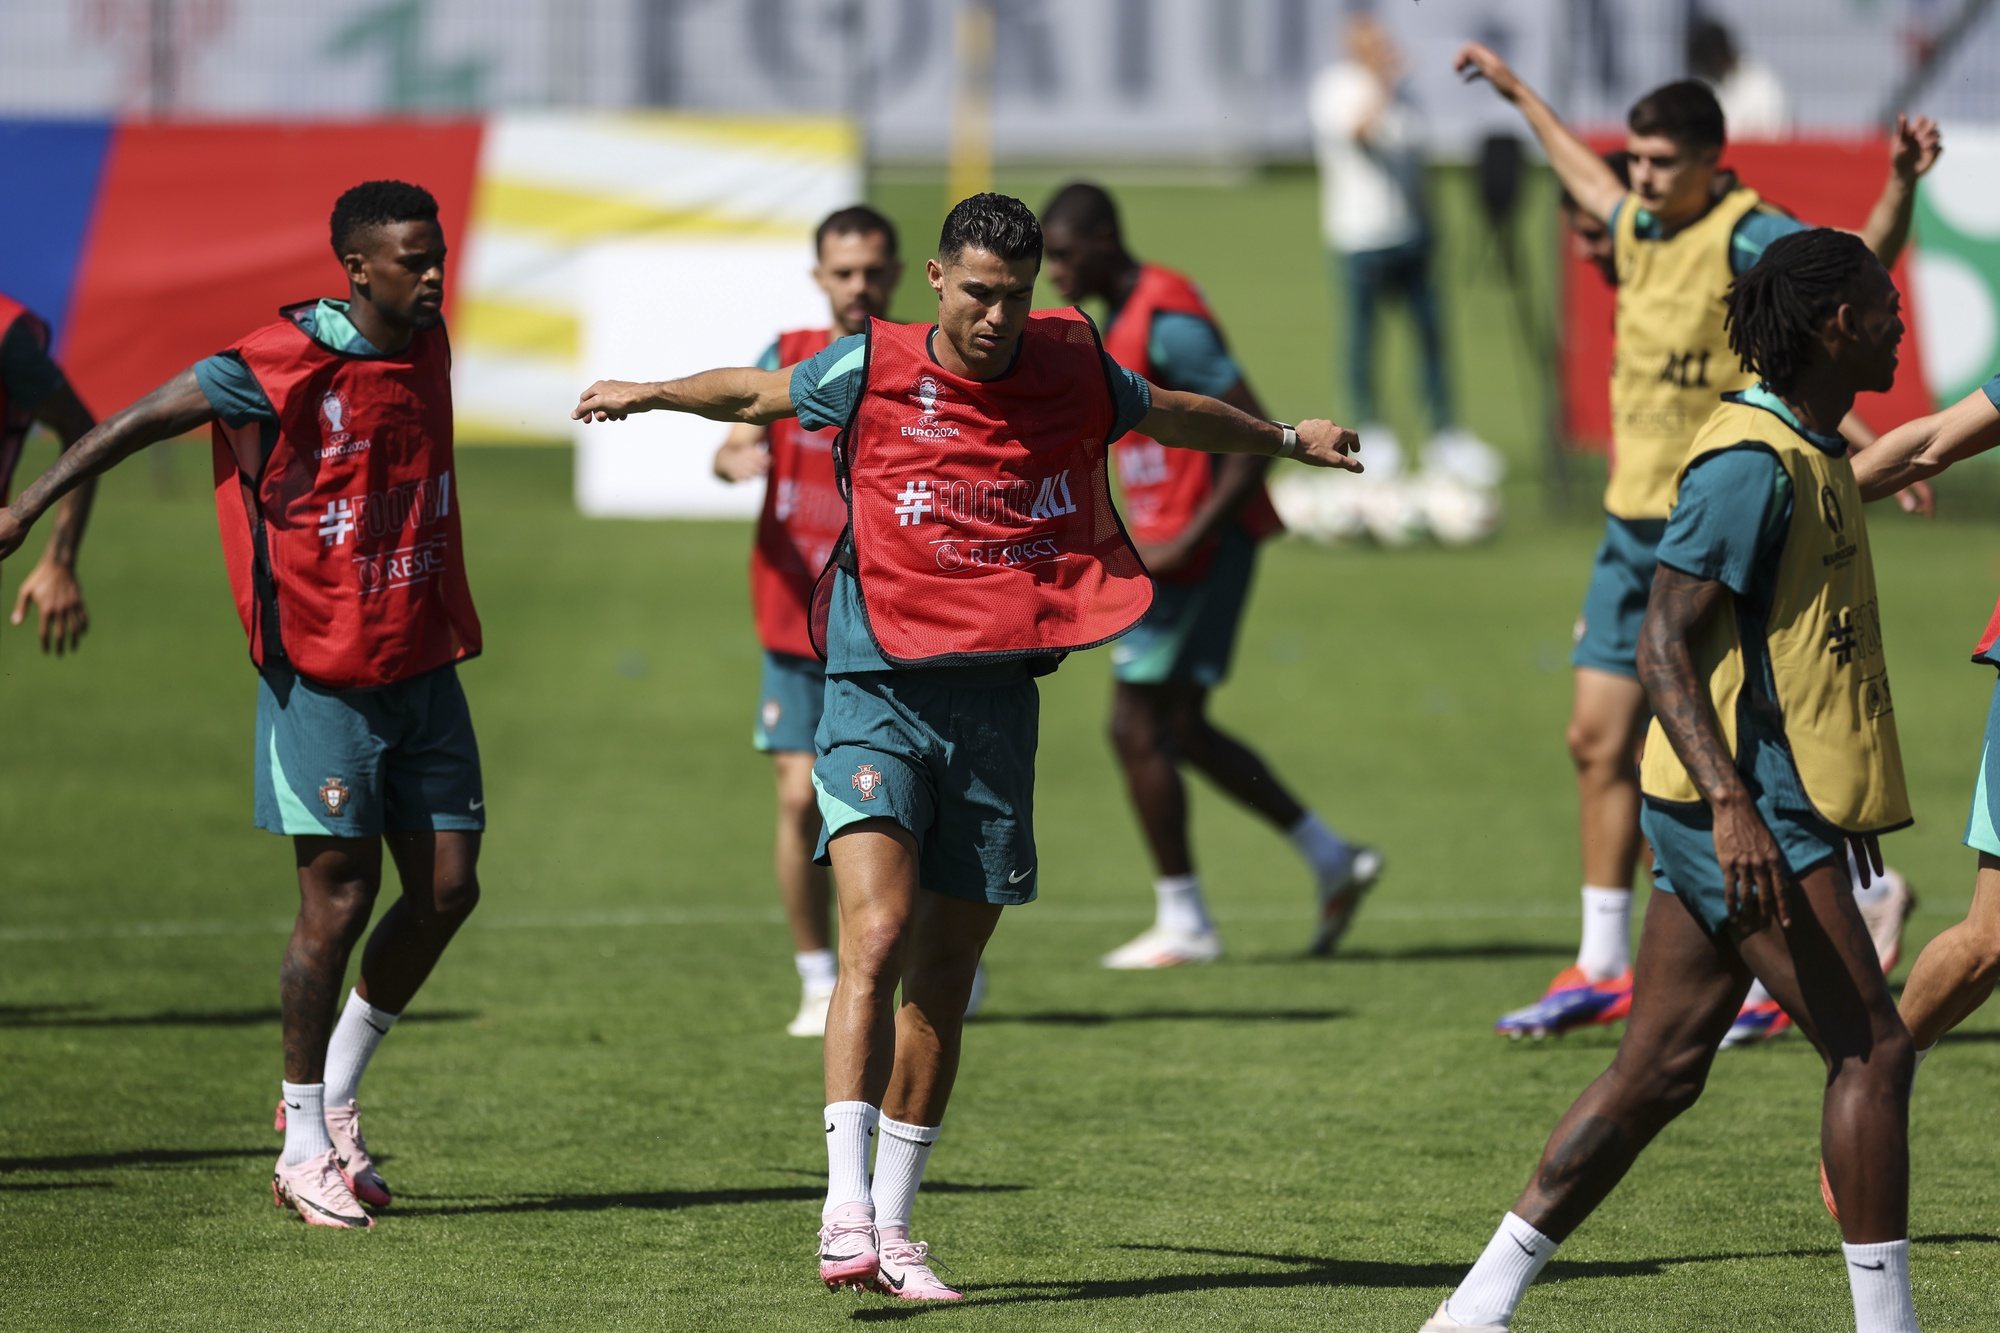 Portugal national soccer team players during a training session in Marienfeld, Harsewinkel, Germany, 25 June 2024. The Portuguese national soccer team is based in Marienfeld, Harsewinkel during the UEFA EURO 2024. MIGUEL A. LOPES/LUSA